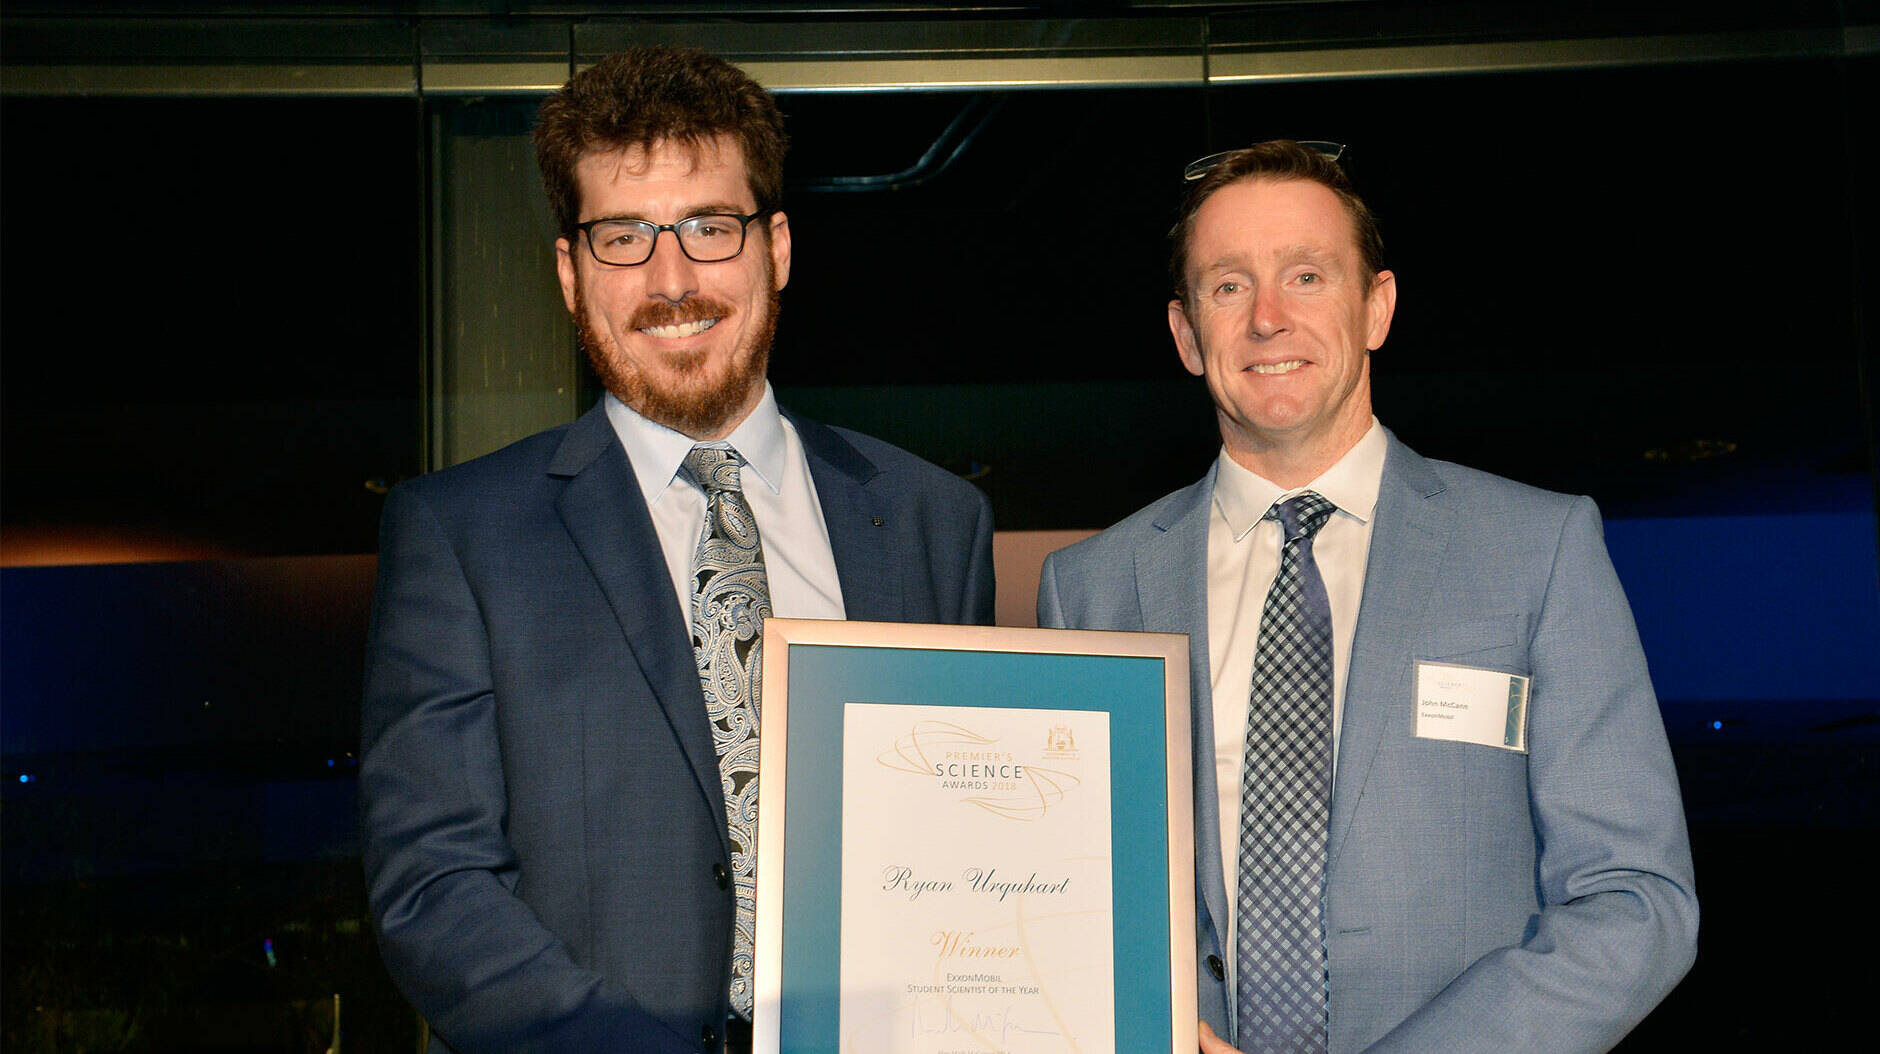 Image Photo  ExxonMobil's Joint Interest Manager, John McCann presents the Student Scientist of the Year 2018 award to joint winner Ryan Urquhart.